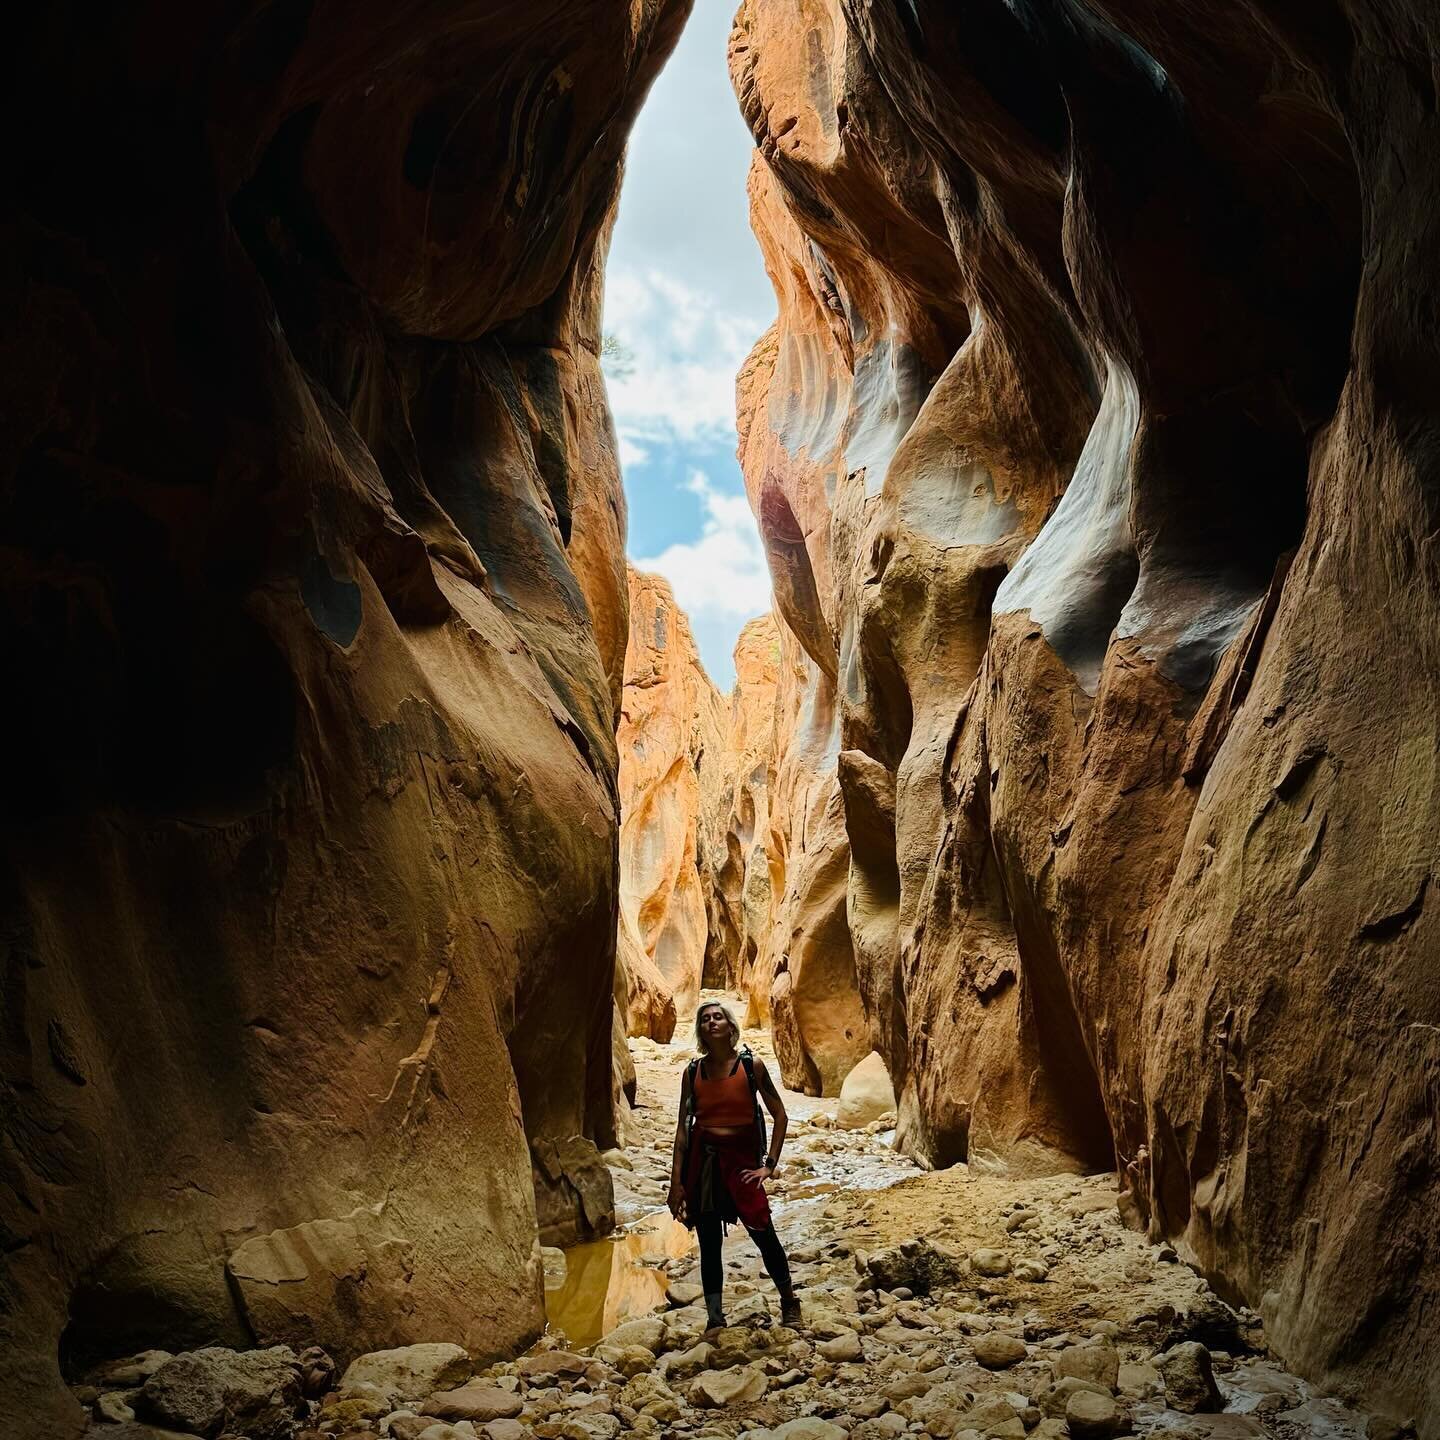 Took a little trip to Utah to shoot a buddies wedding (pics coming soon). Had a day to hike Buckskin Gulch. Awesome. All photos shot on the iPhone 15 pro.